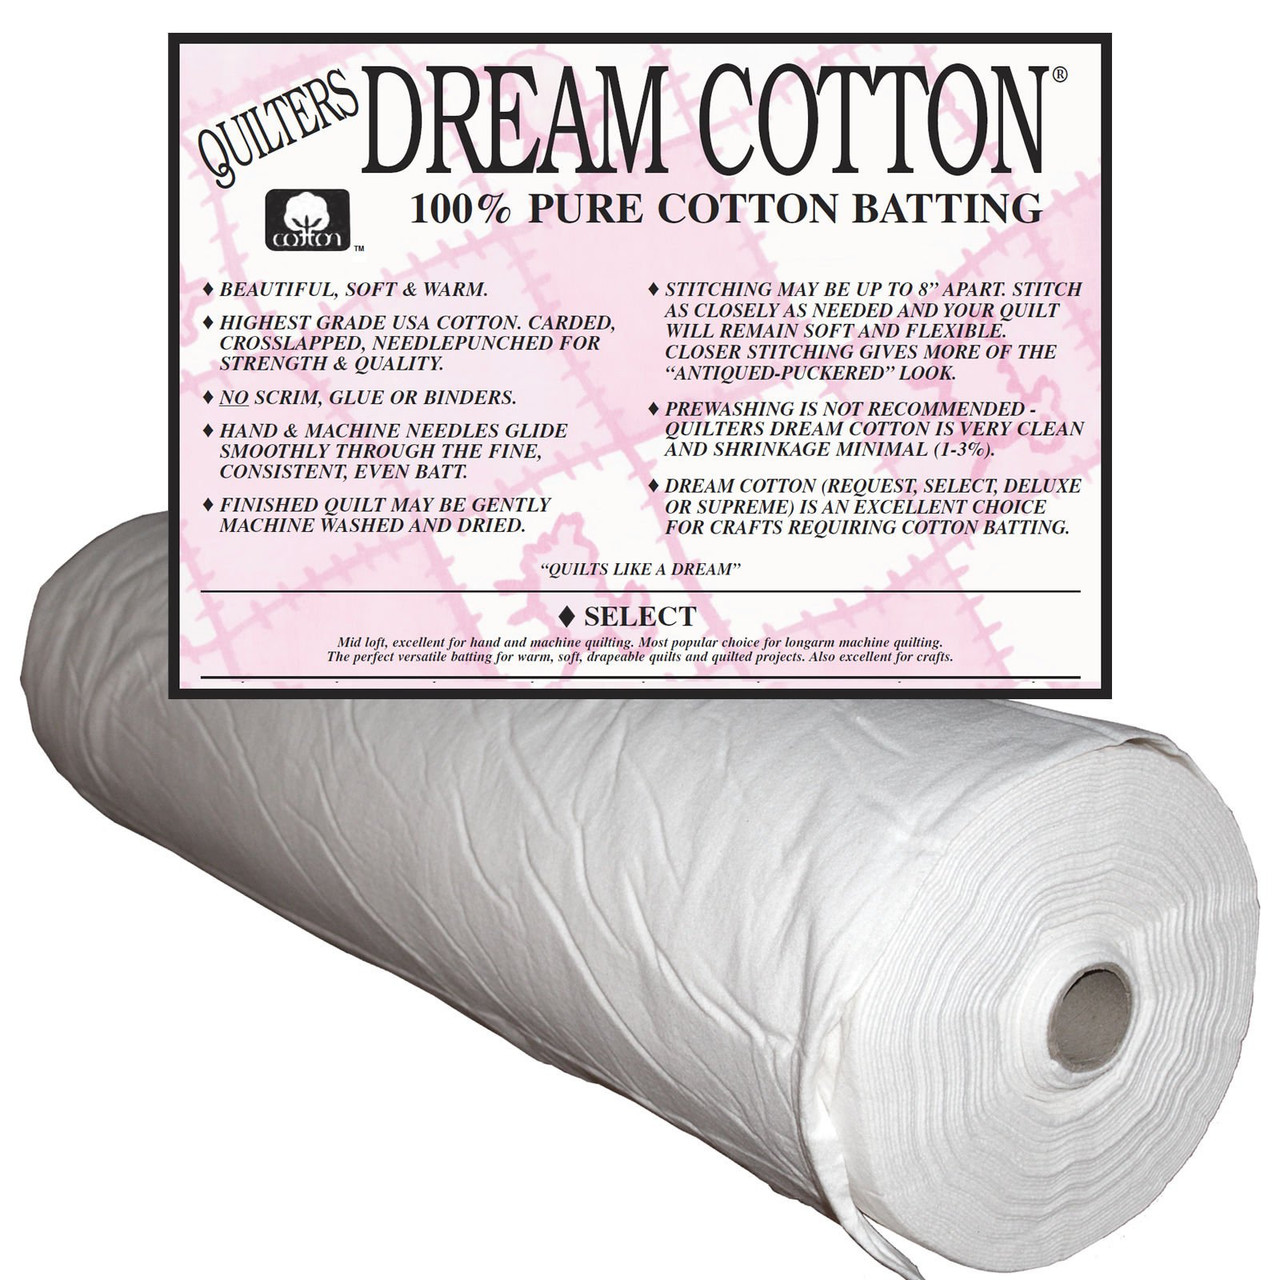 Dream Cotton Select Natural and White Sampler Case